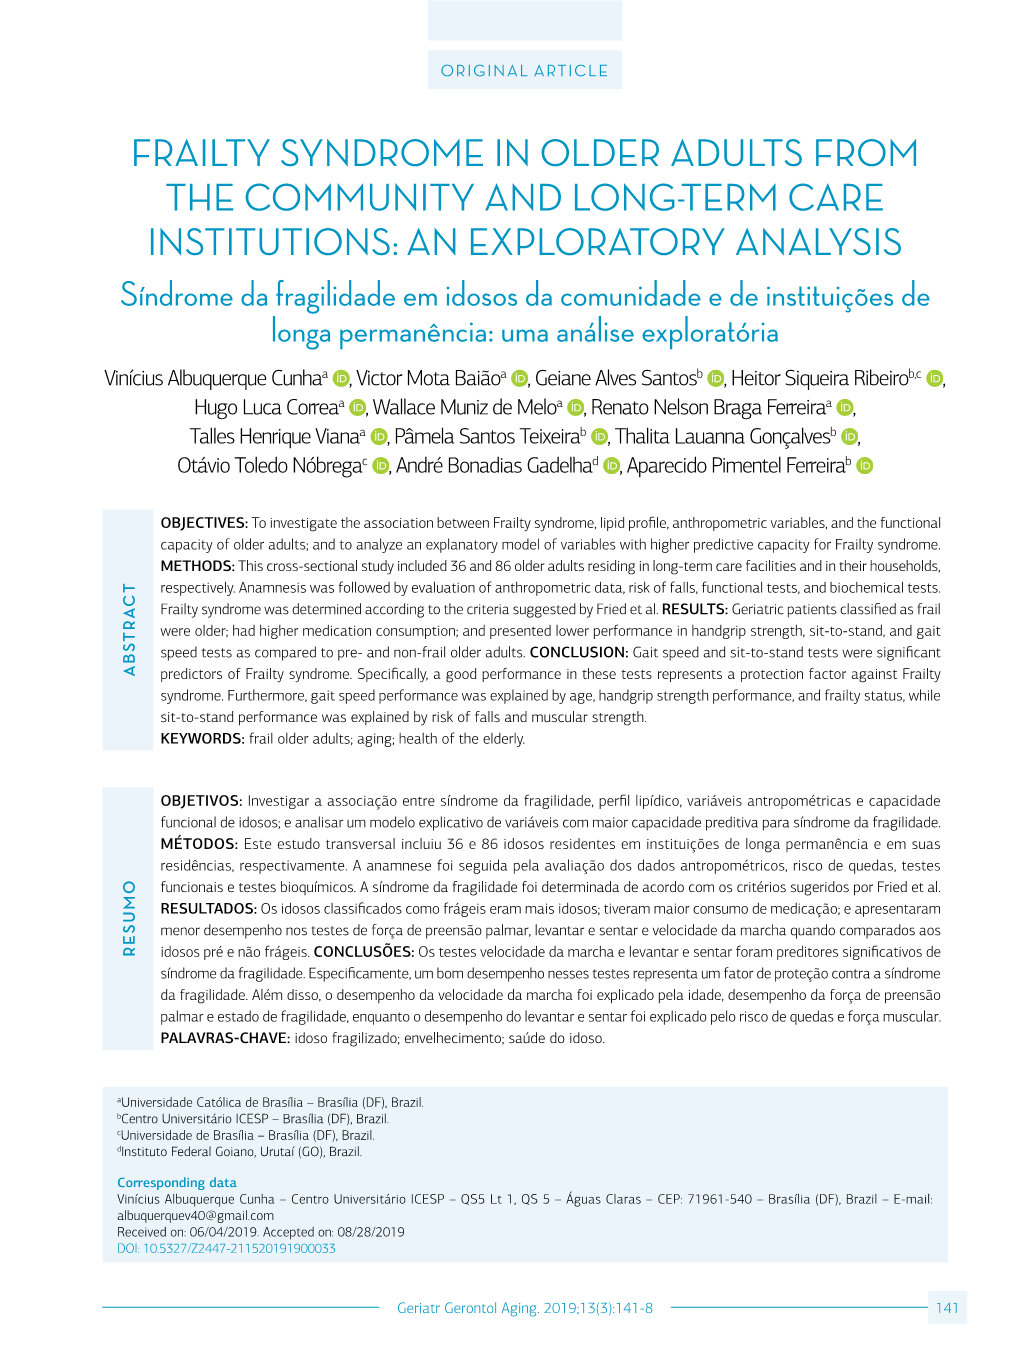 Frailty Syndrome in Older Adults from the Community and Long-Term Care